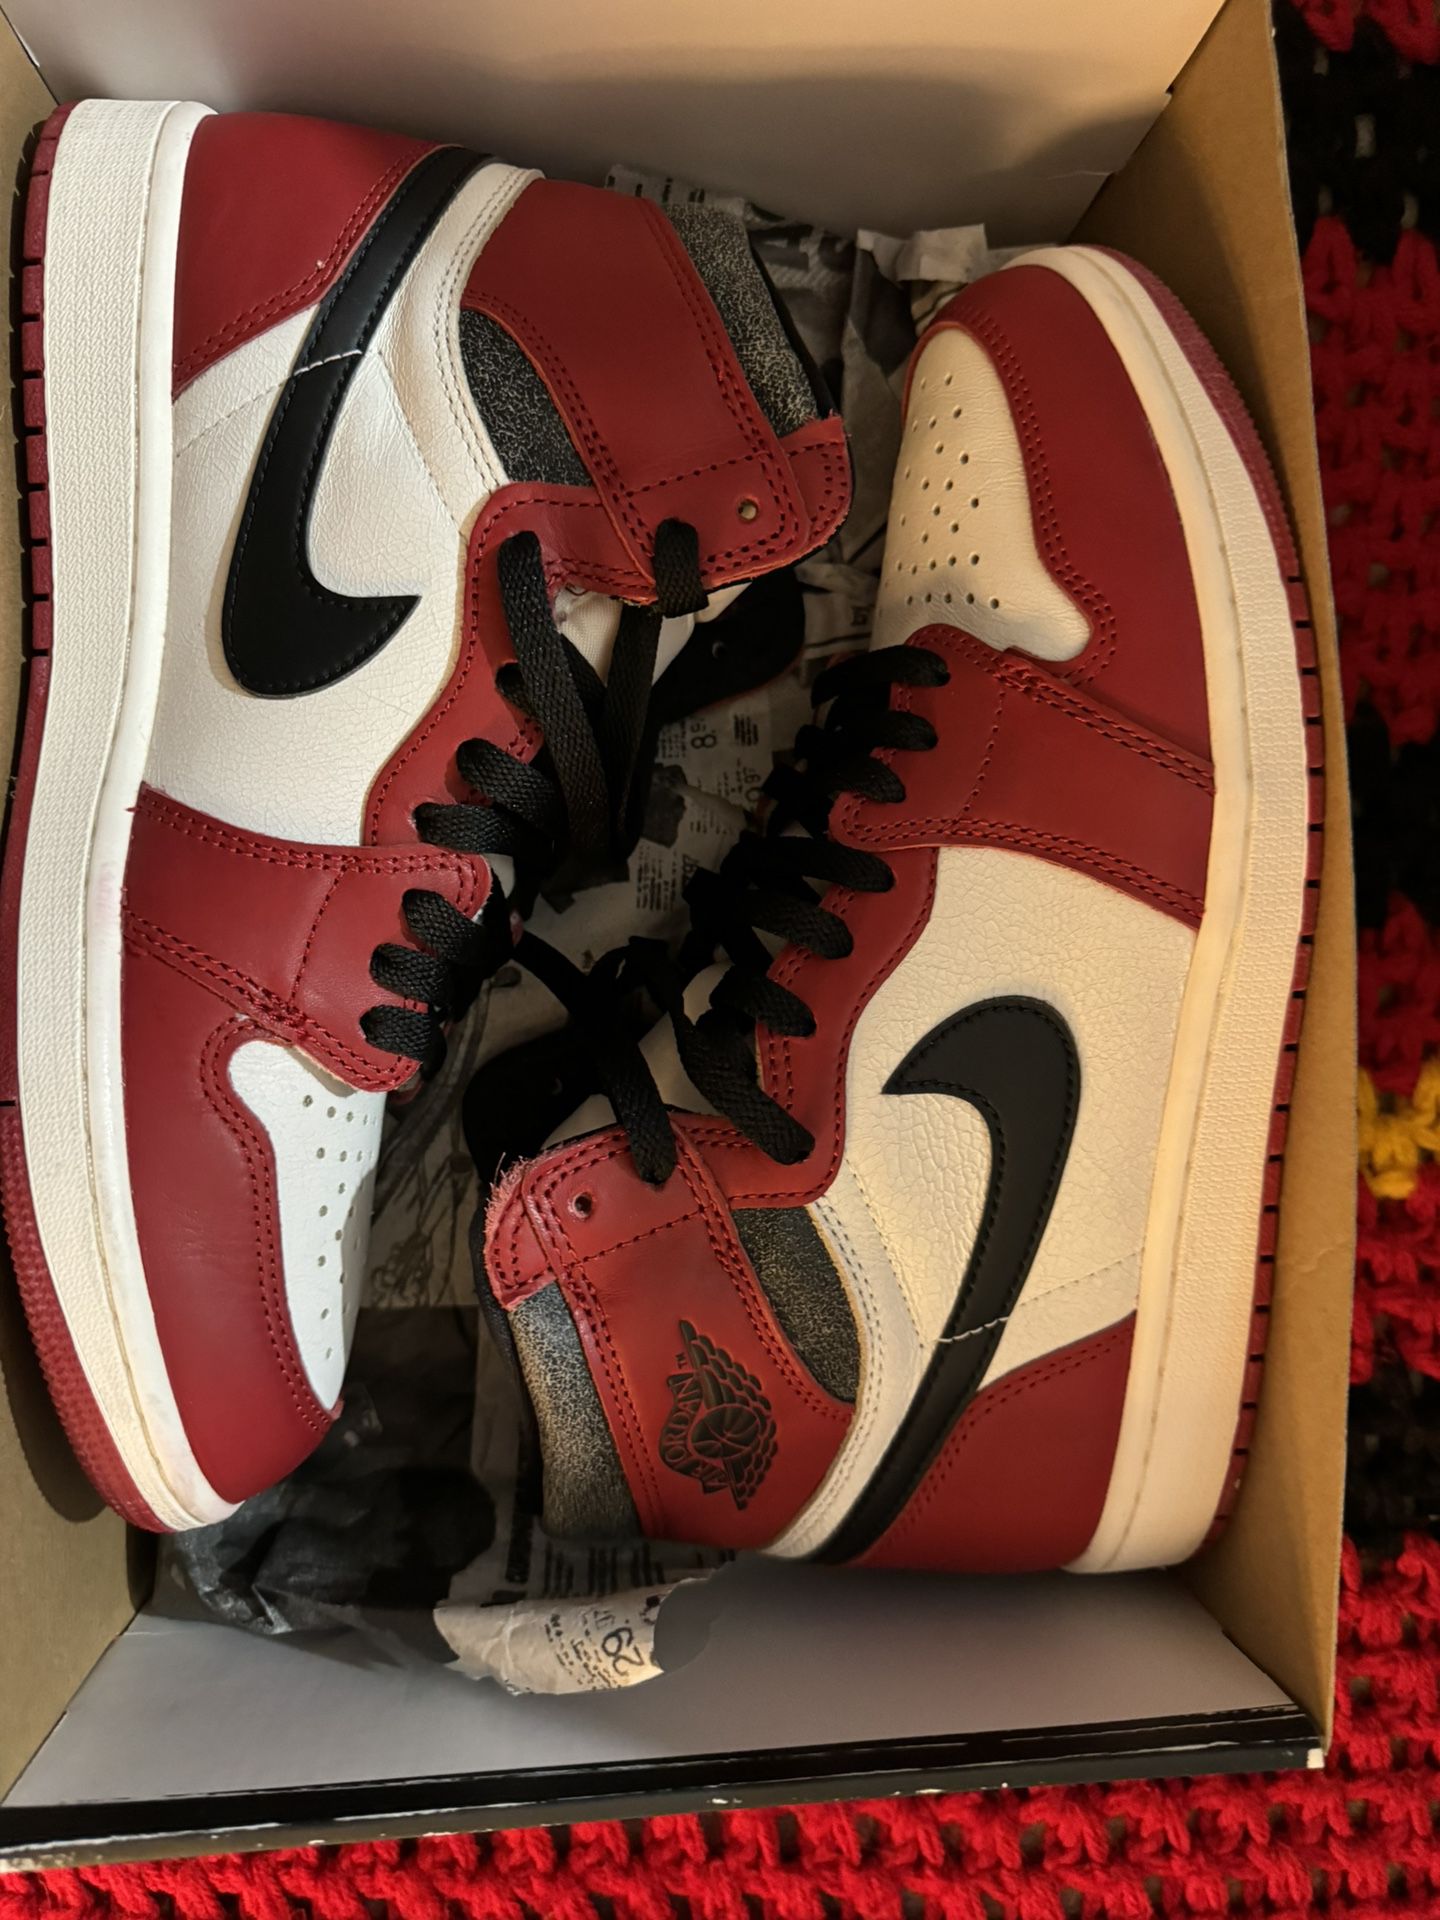 Jordan 1 “Chicago, Lost And Found”